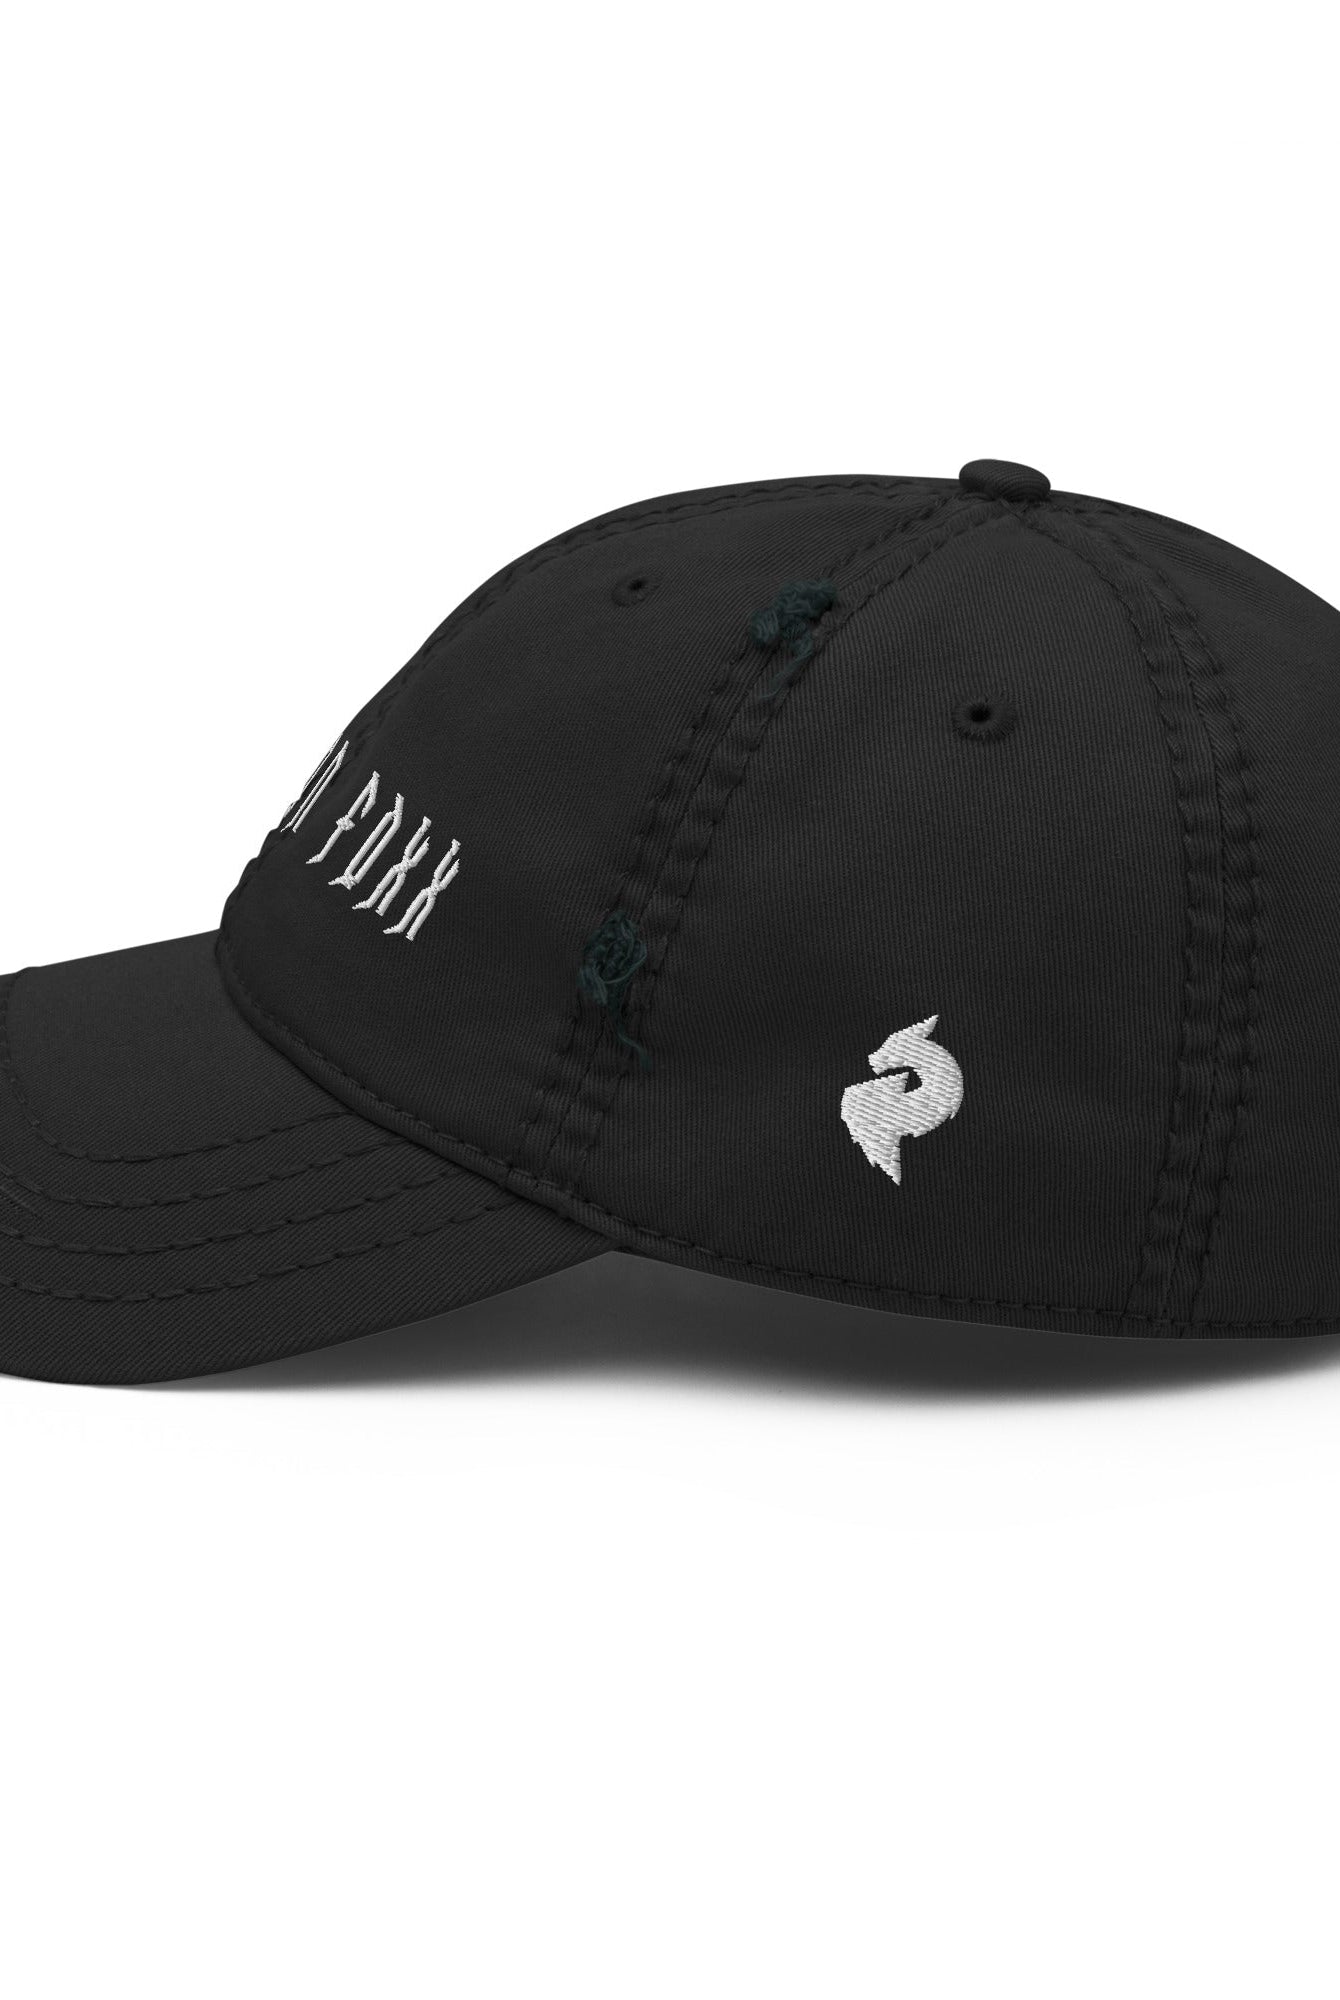 Distressed Dad Hats - White Embroidered - Distressed Dad Hat - DRAGON FOXX™ - Distressed Dad Hats - White Embroidered - 7823977_10990 - Black - Distressed - One size - Accessories - Black Distressed Hat - Charcoal Grey Distressed Hat